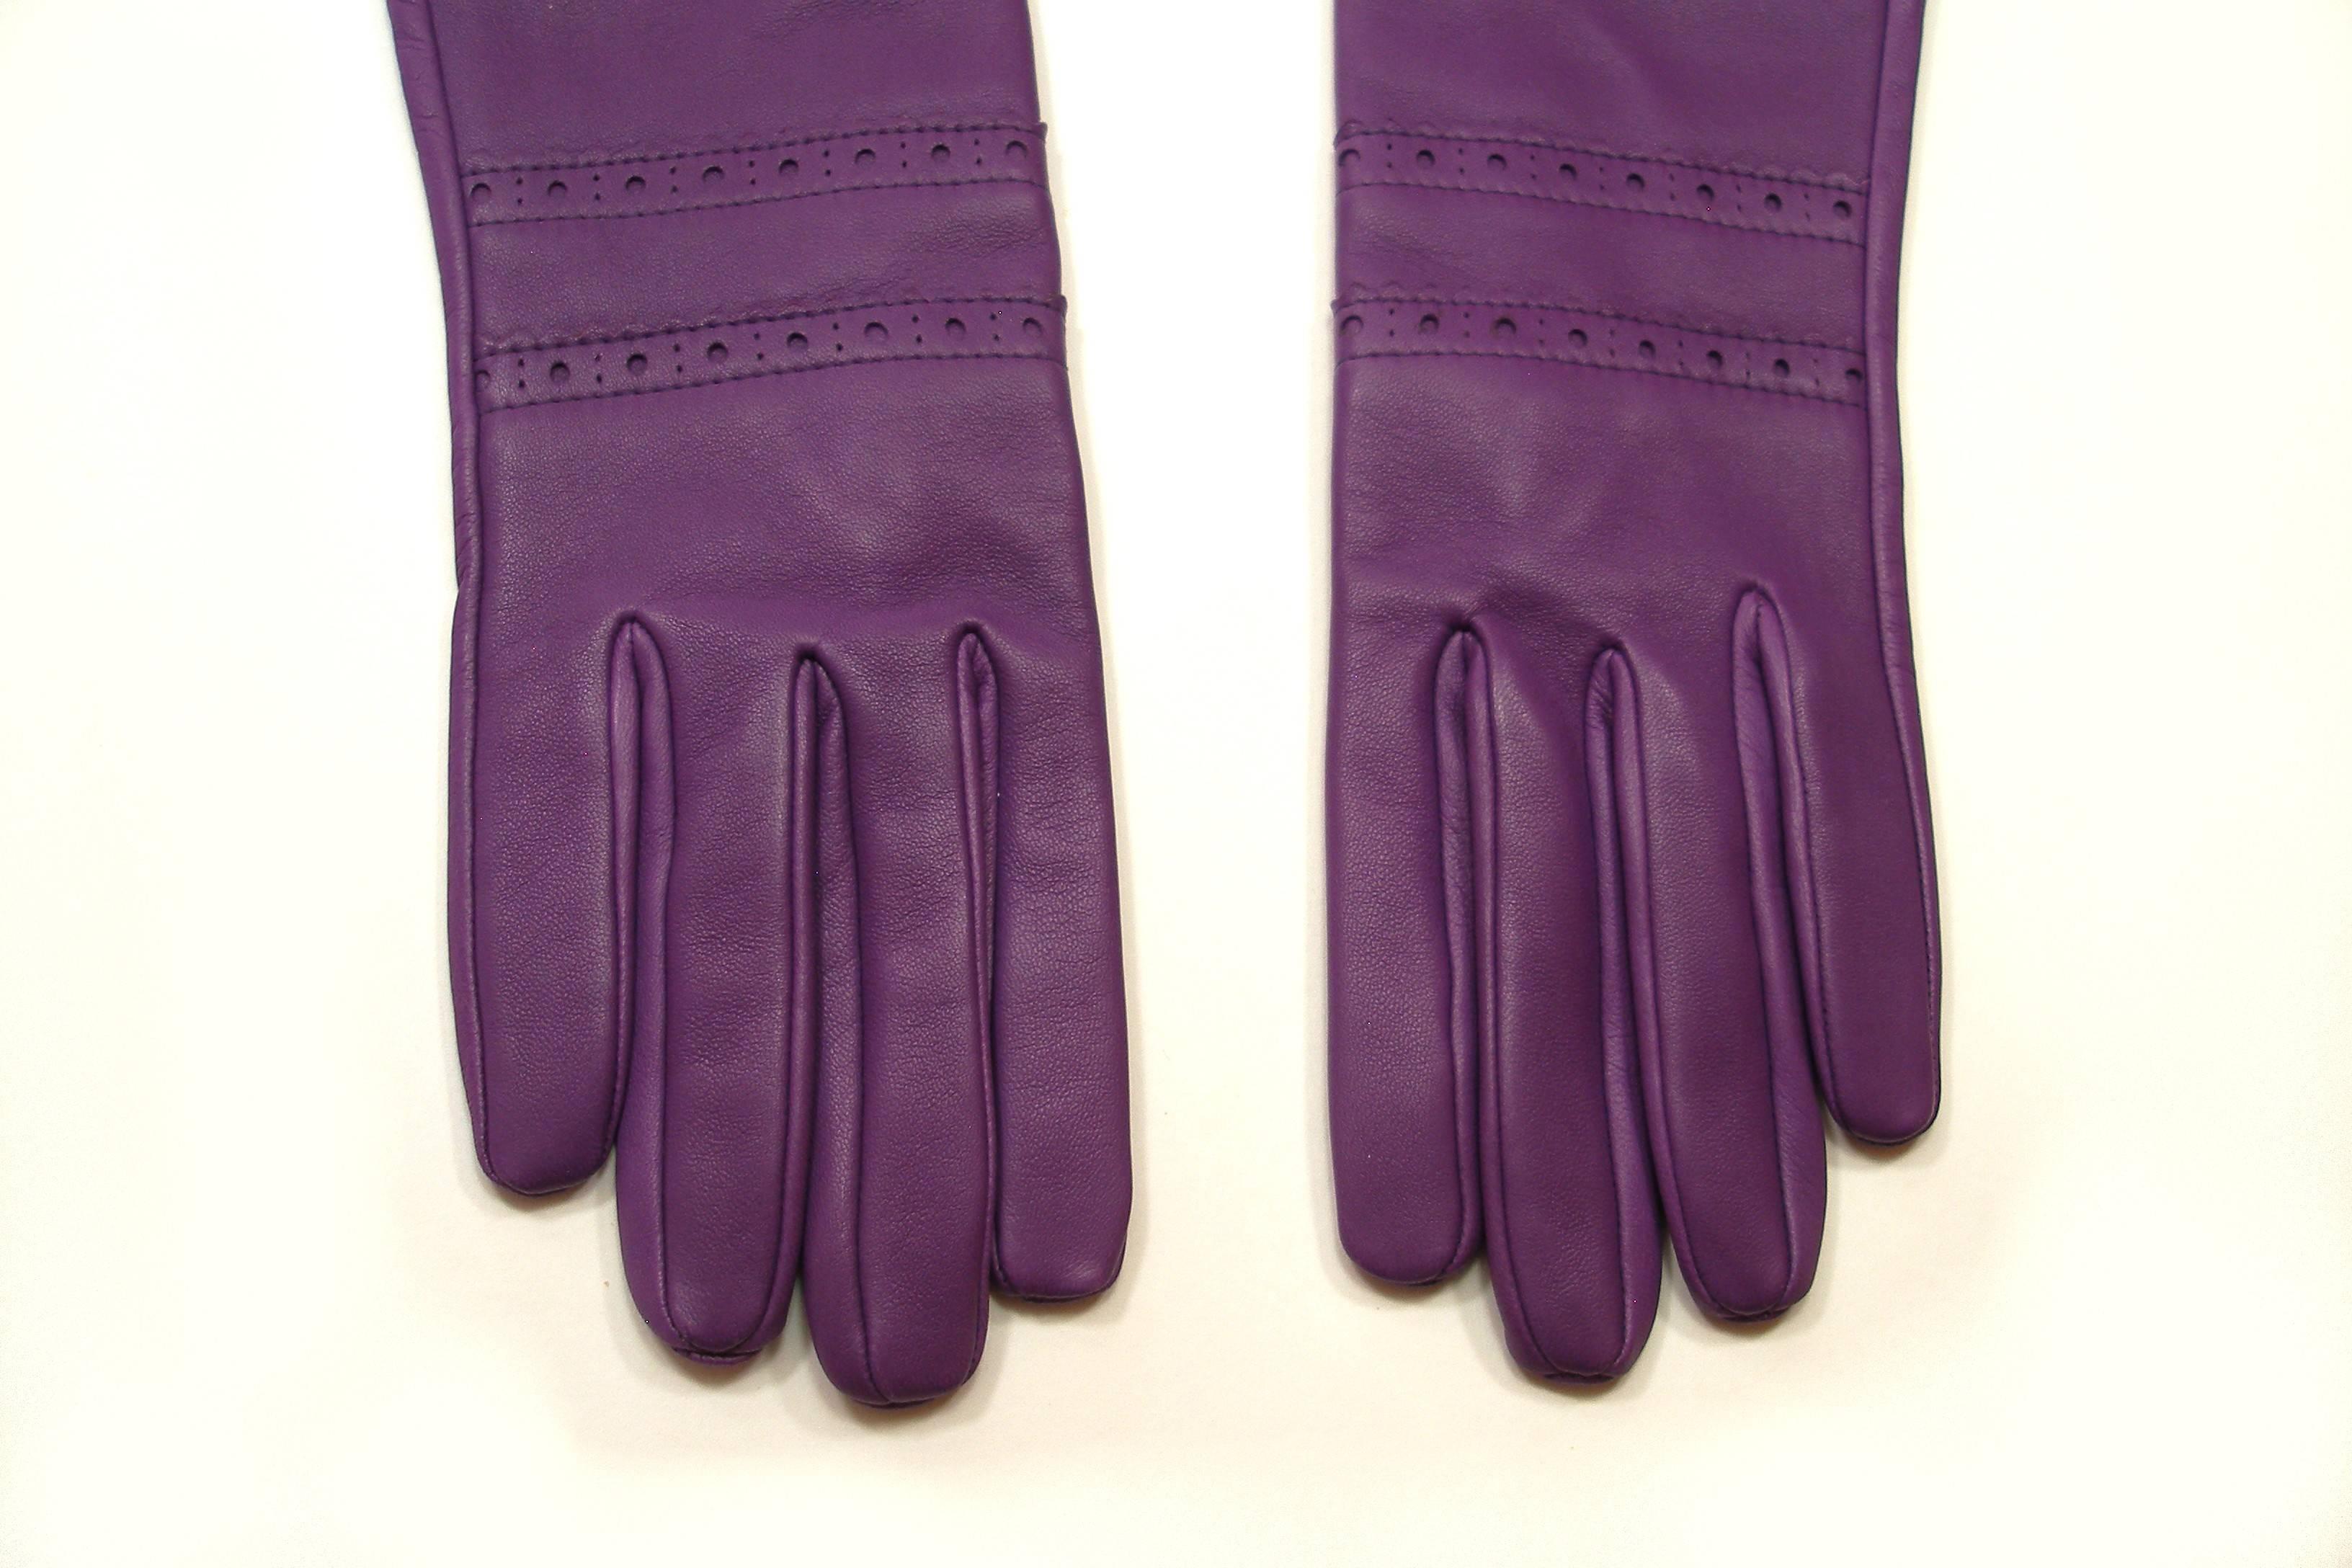  Very Nice color ! 
 Hermès Long gloves in Ultra Purple lambskin leather .
 Brand new 
 Size : 7.5 
 Longueur totale : 40 cm
 Sorry no box 
 INTERNATIOANALS BUYERS : TAXES ARE INCLUDED FOR THIS ITEM .
 